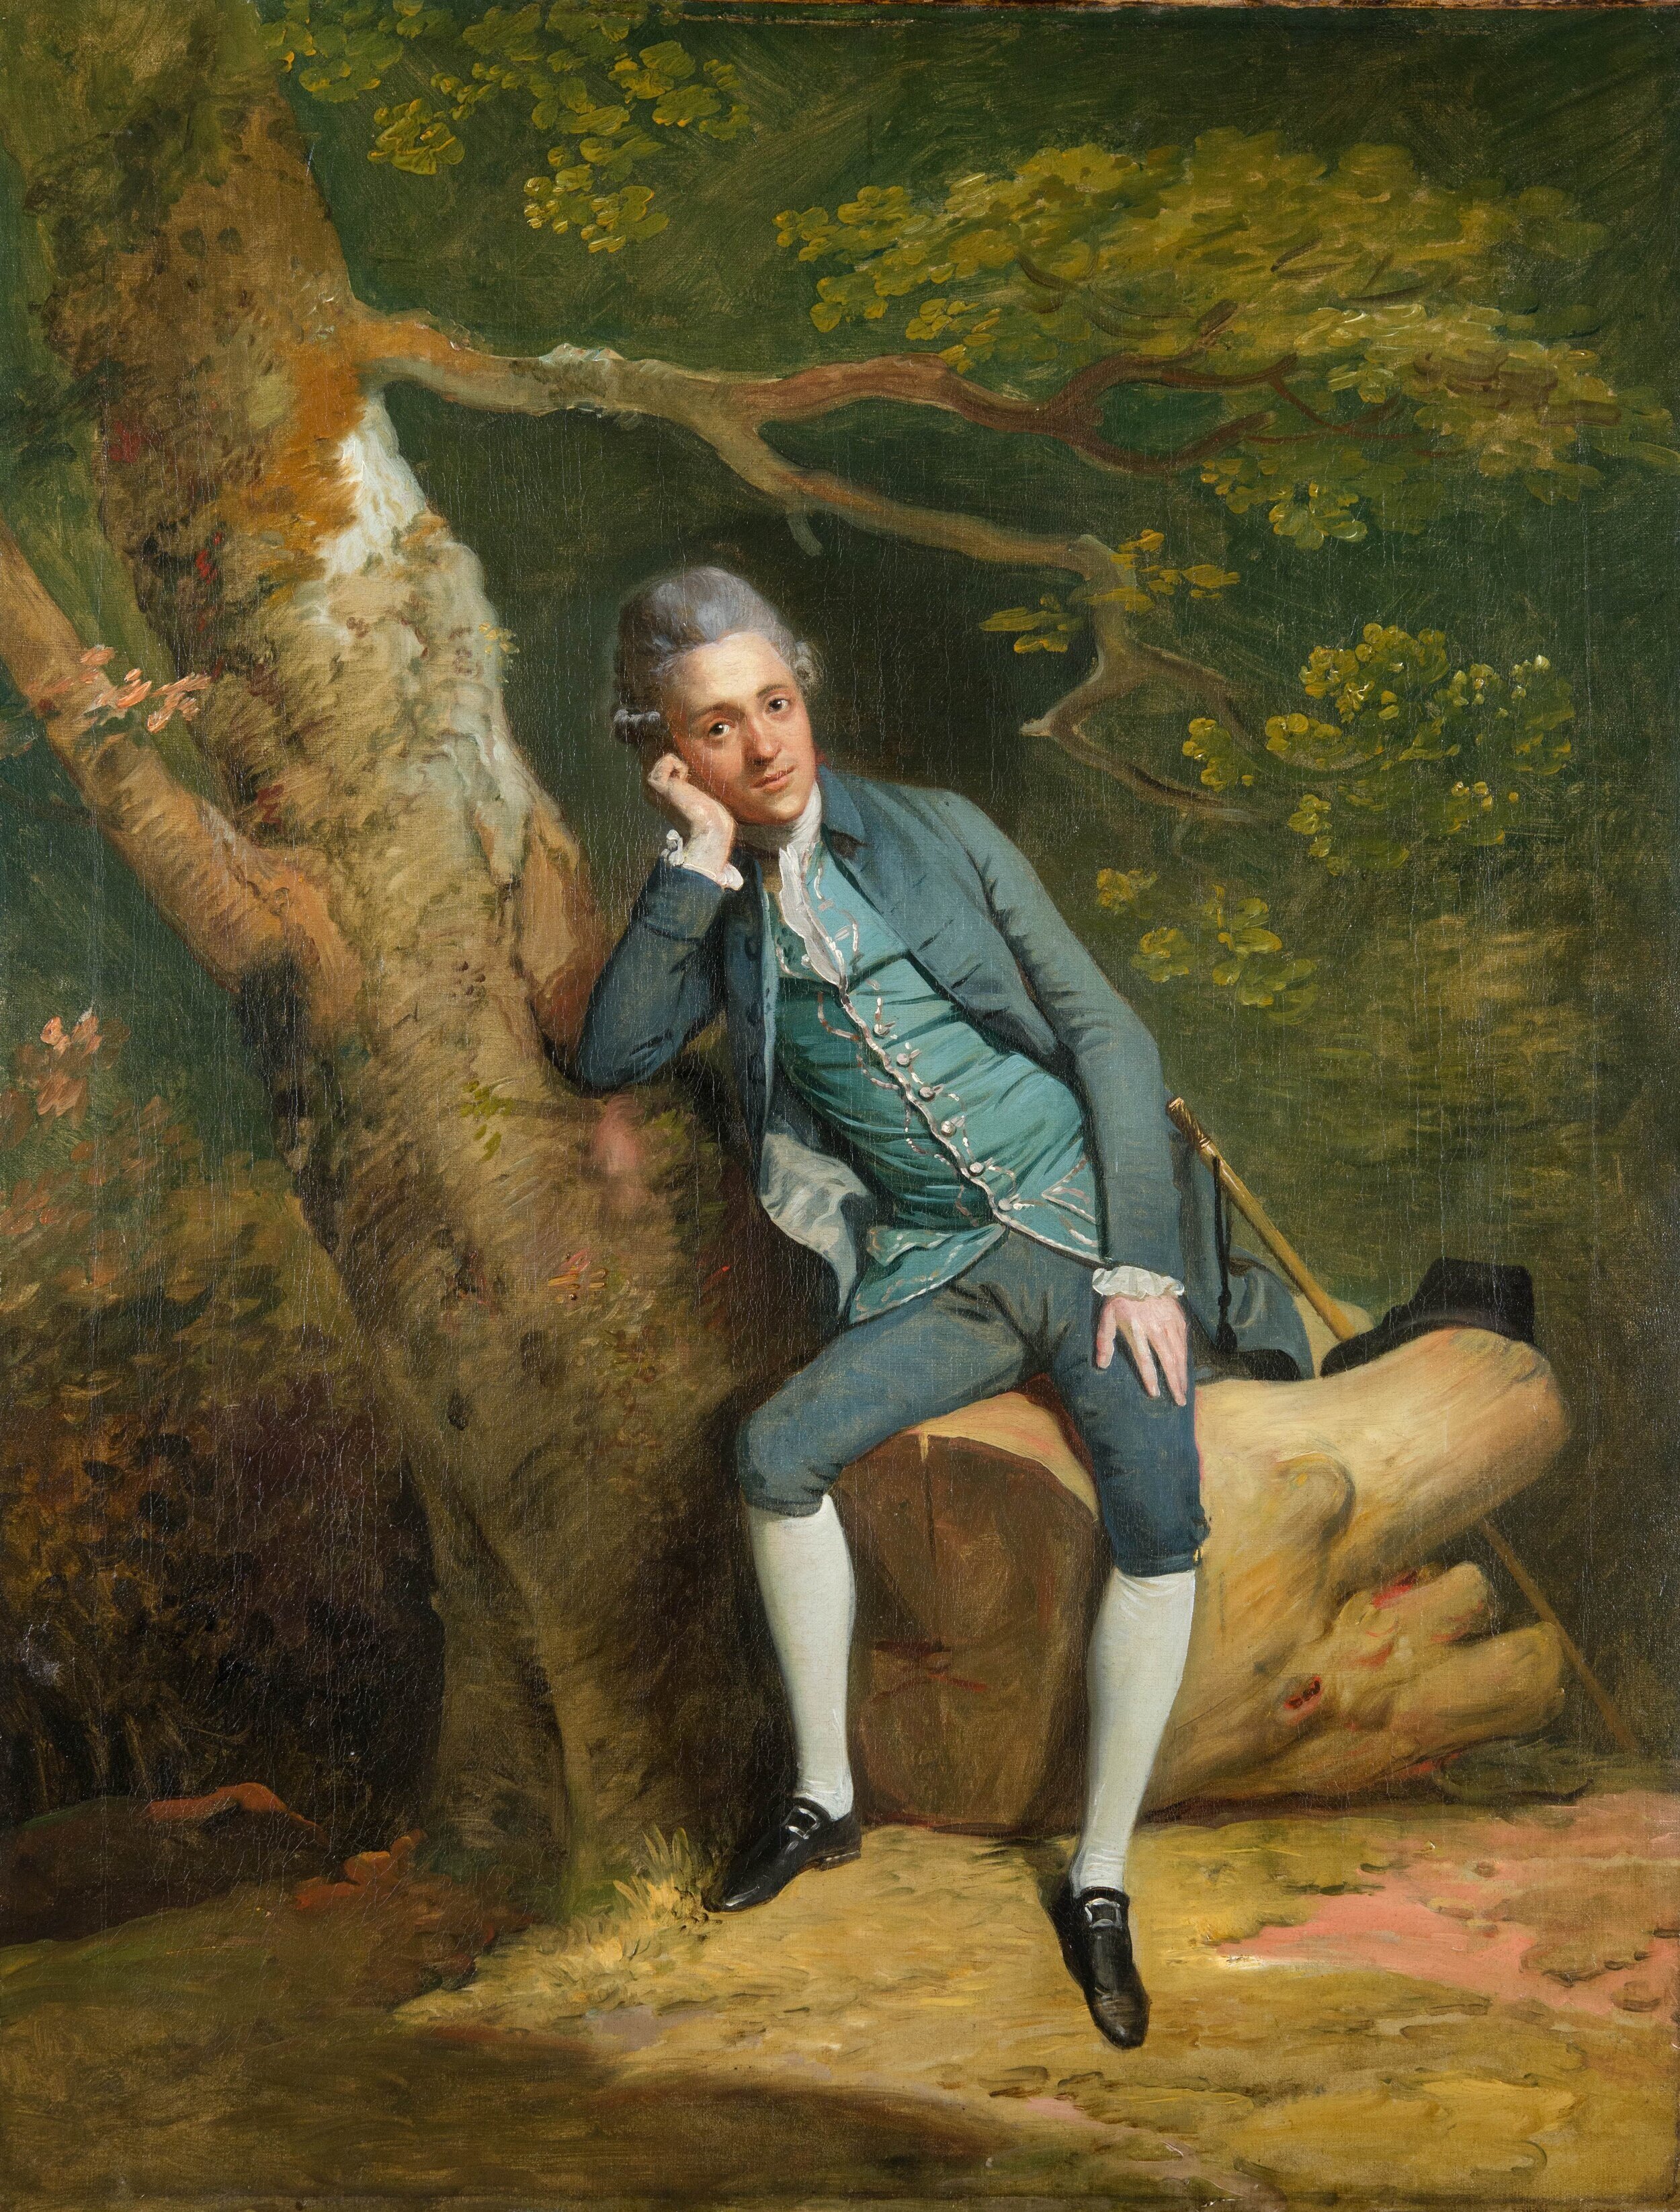 Episode 2 - ‘A Country Gentleman, Charles Burnet’ by Johann Zoffany